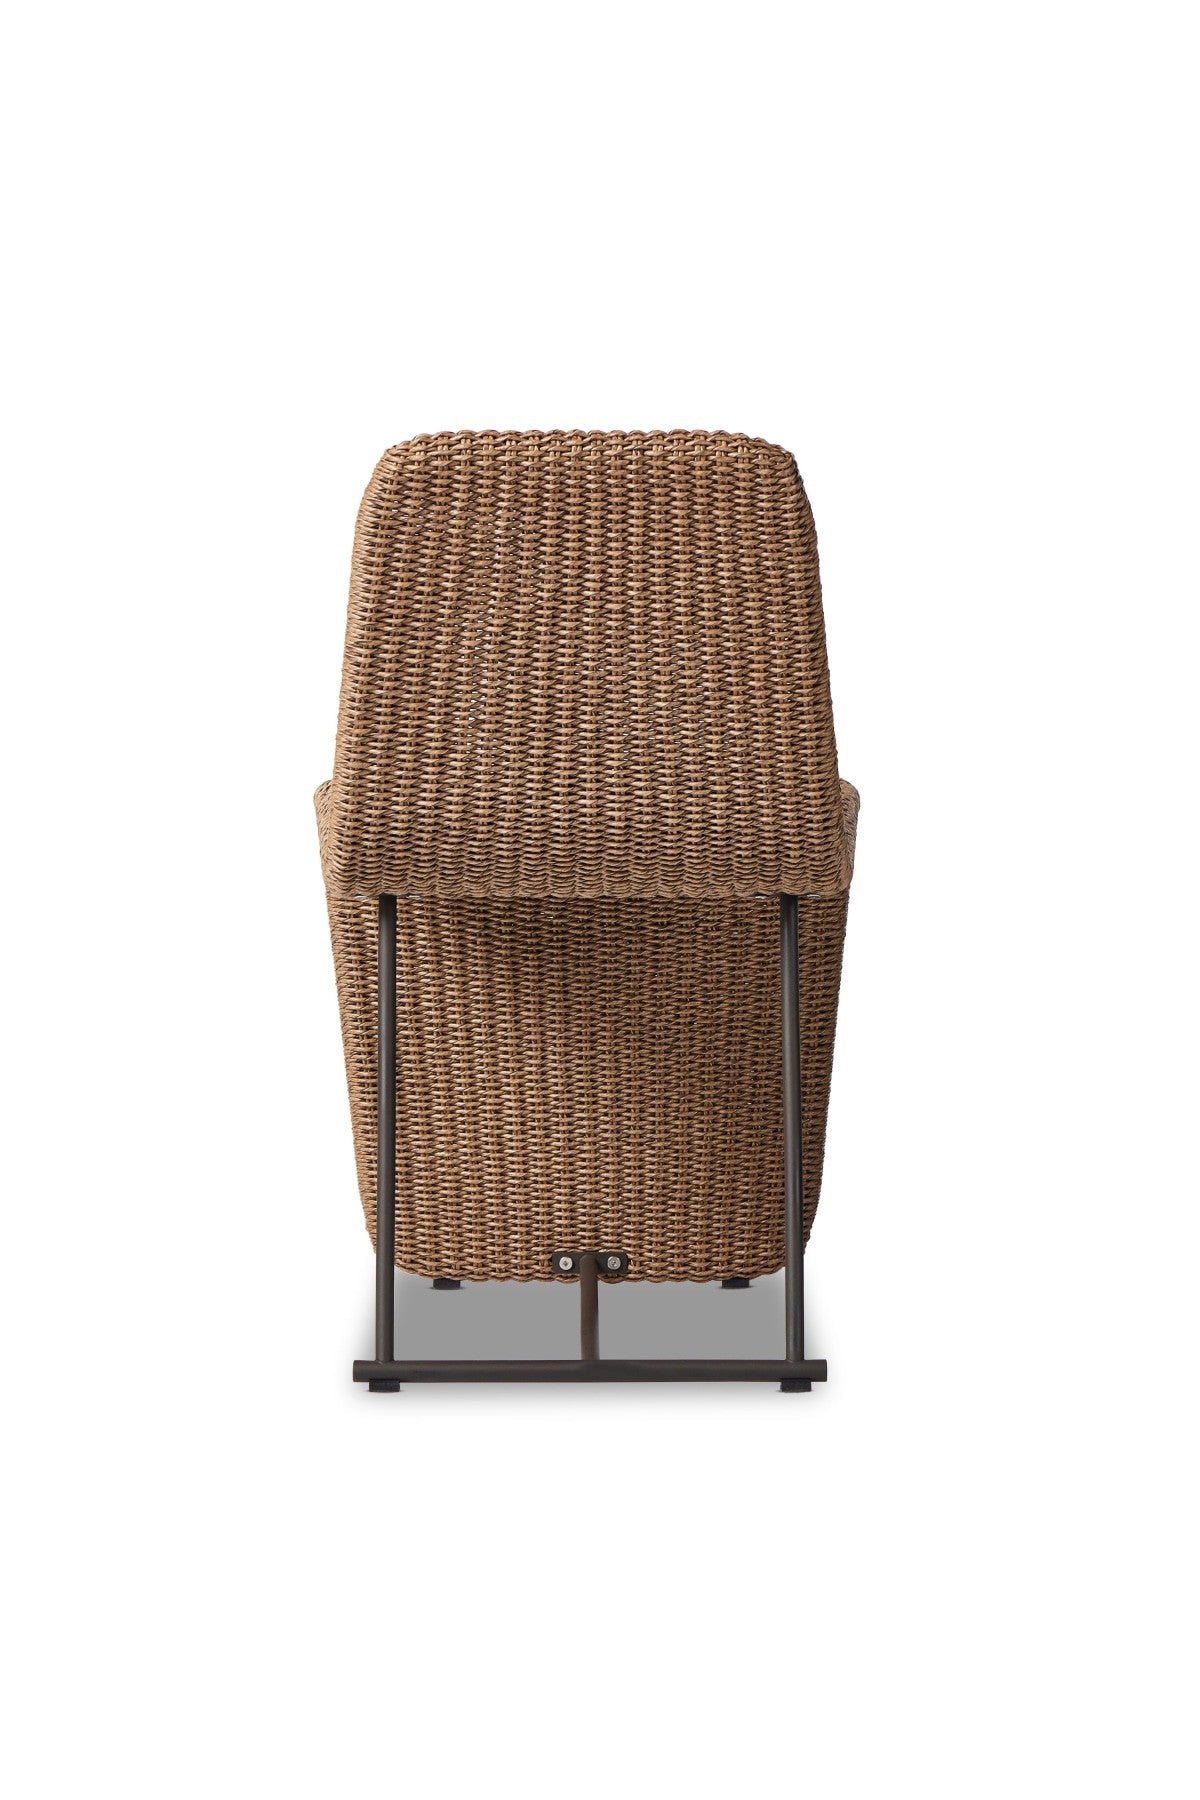 Fargo Outdoor Dining Chair - 2 Colors